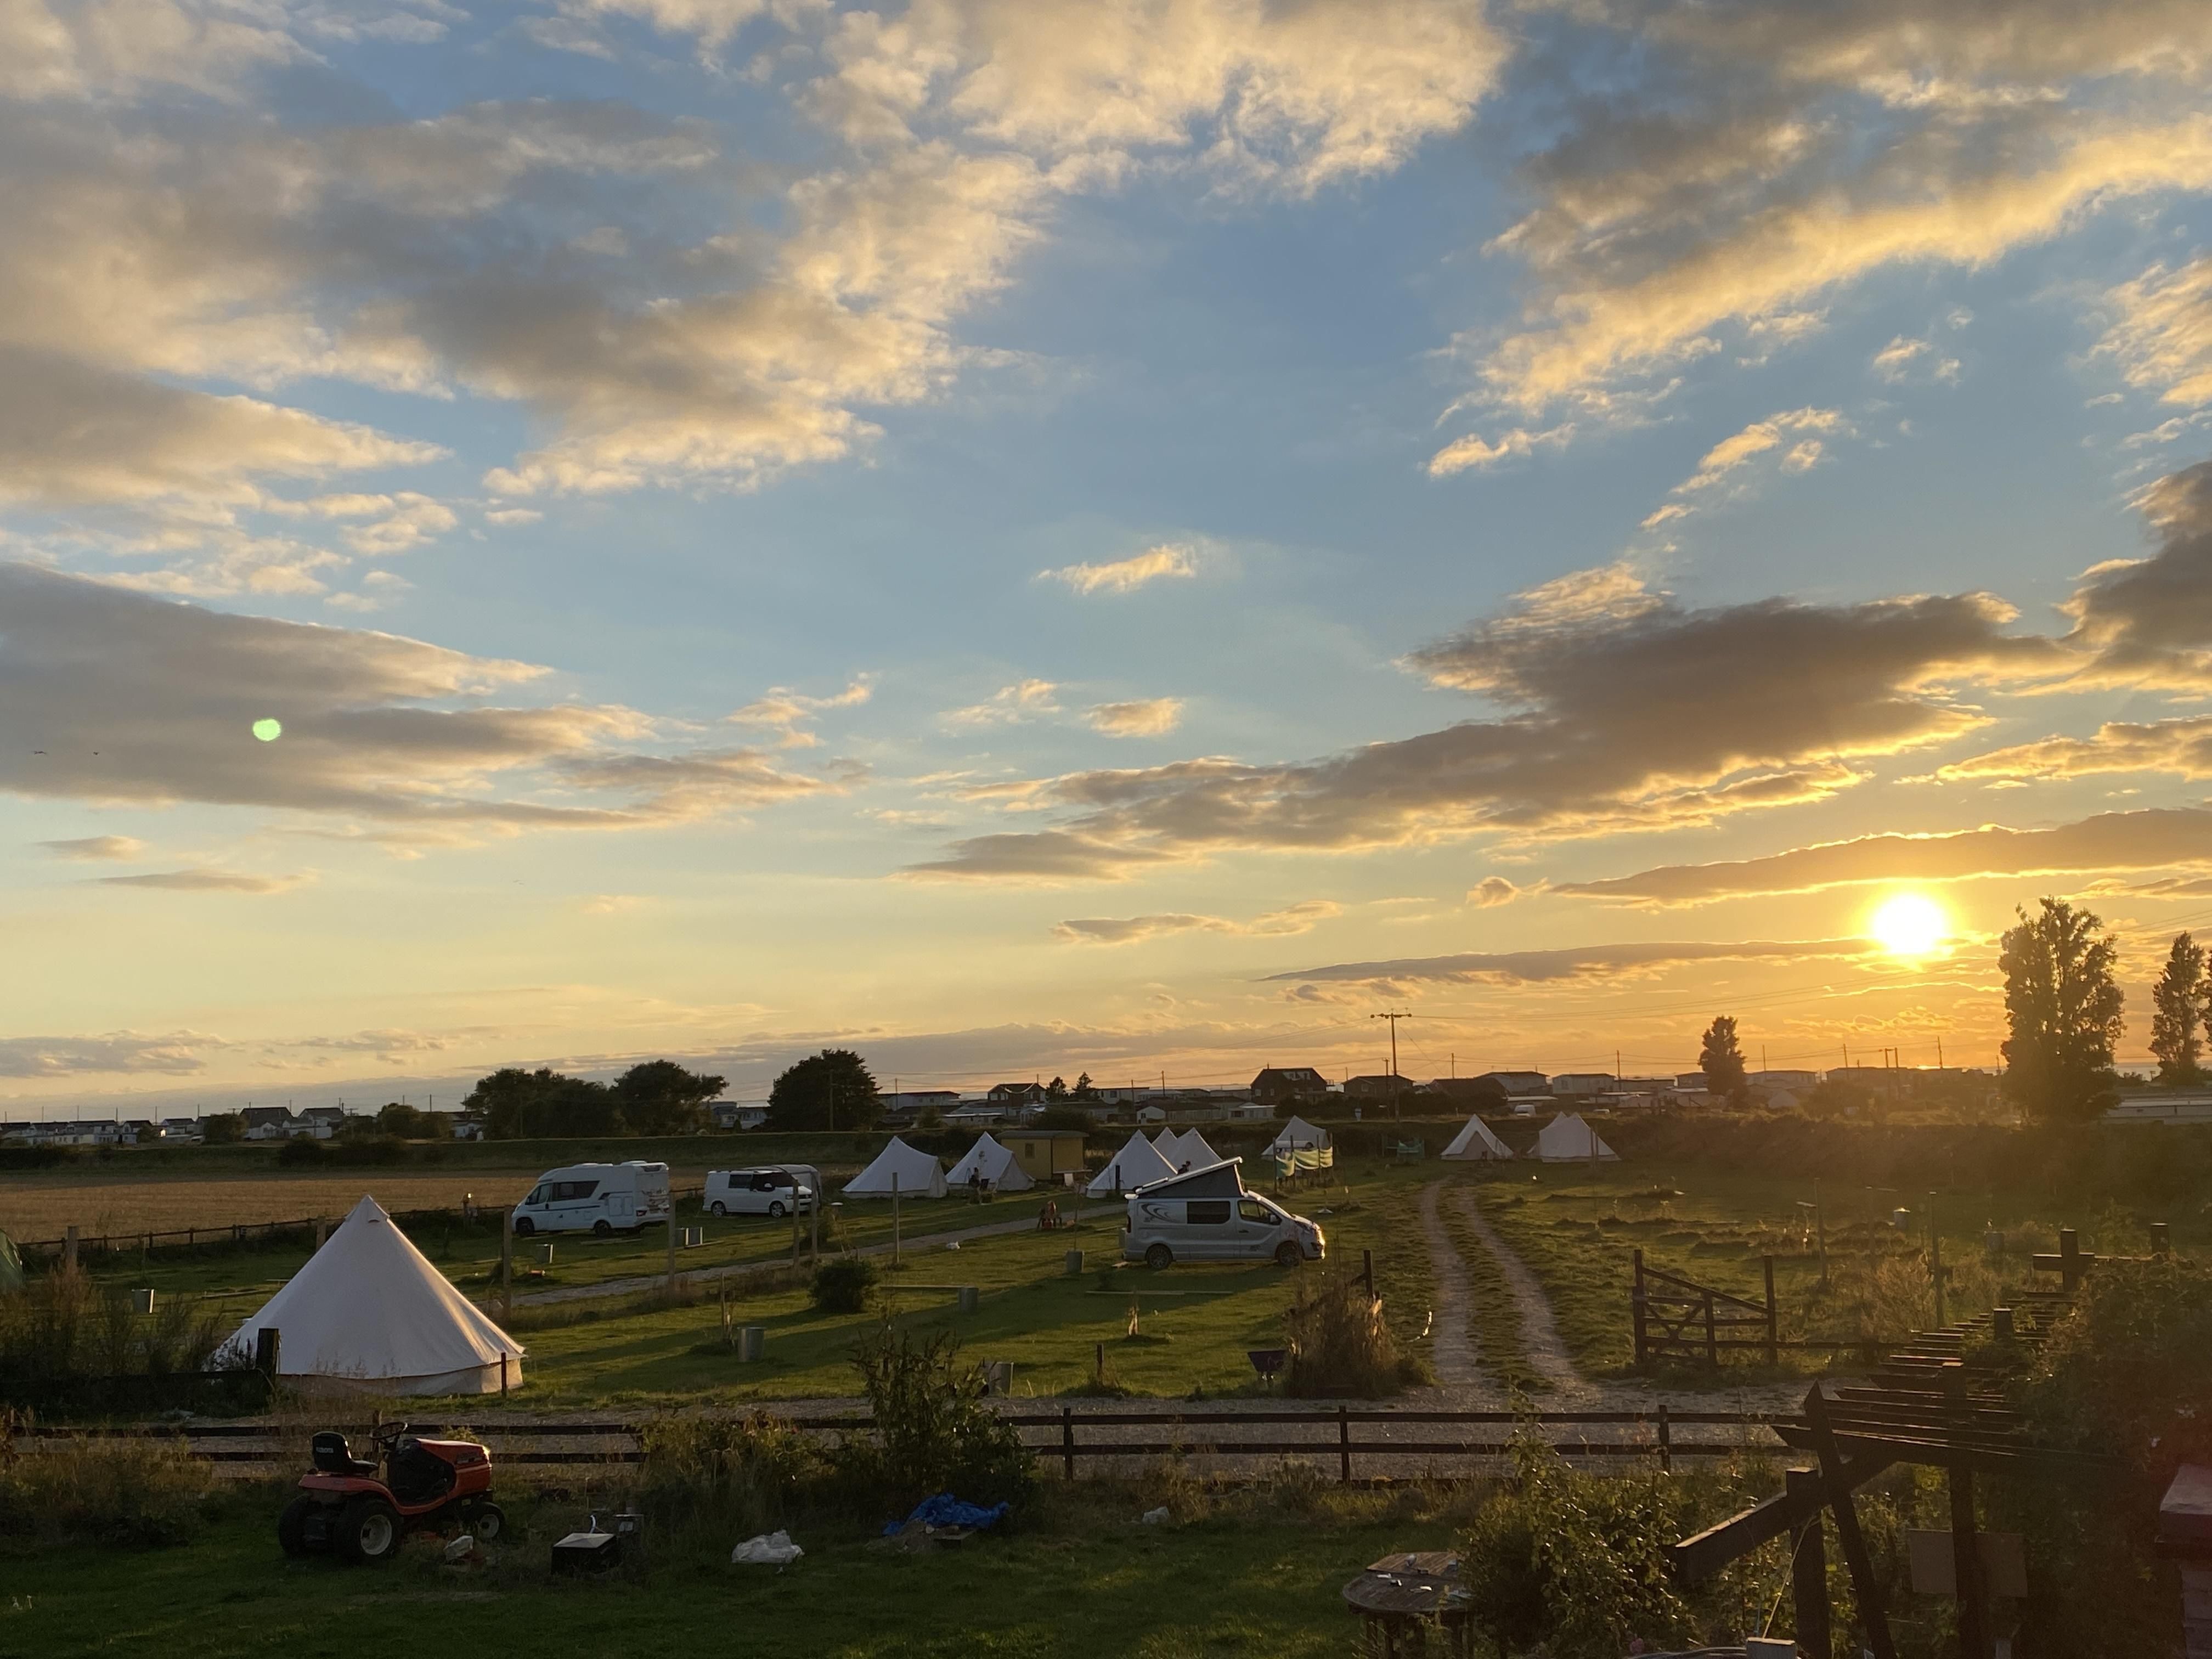 Why go Camping in Hunstanton? A hunstanton campsite with the sun setting in the background with a beautiful blue sky